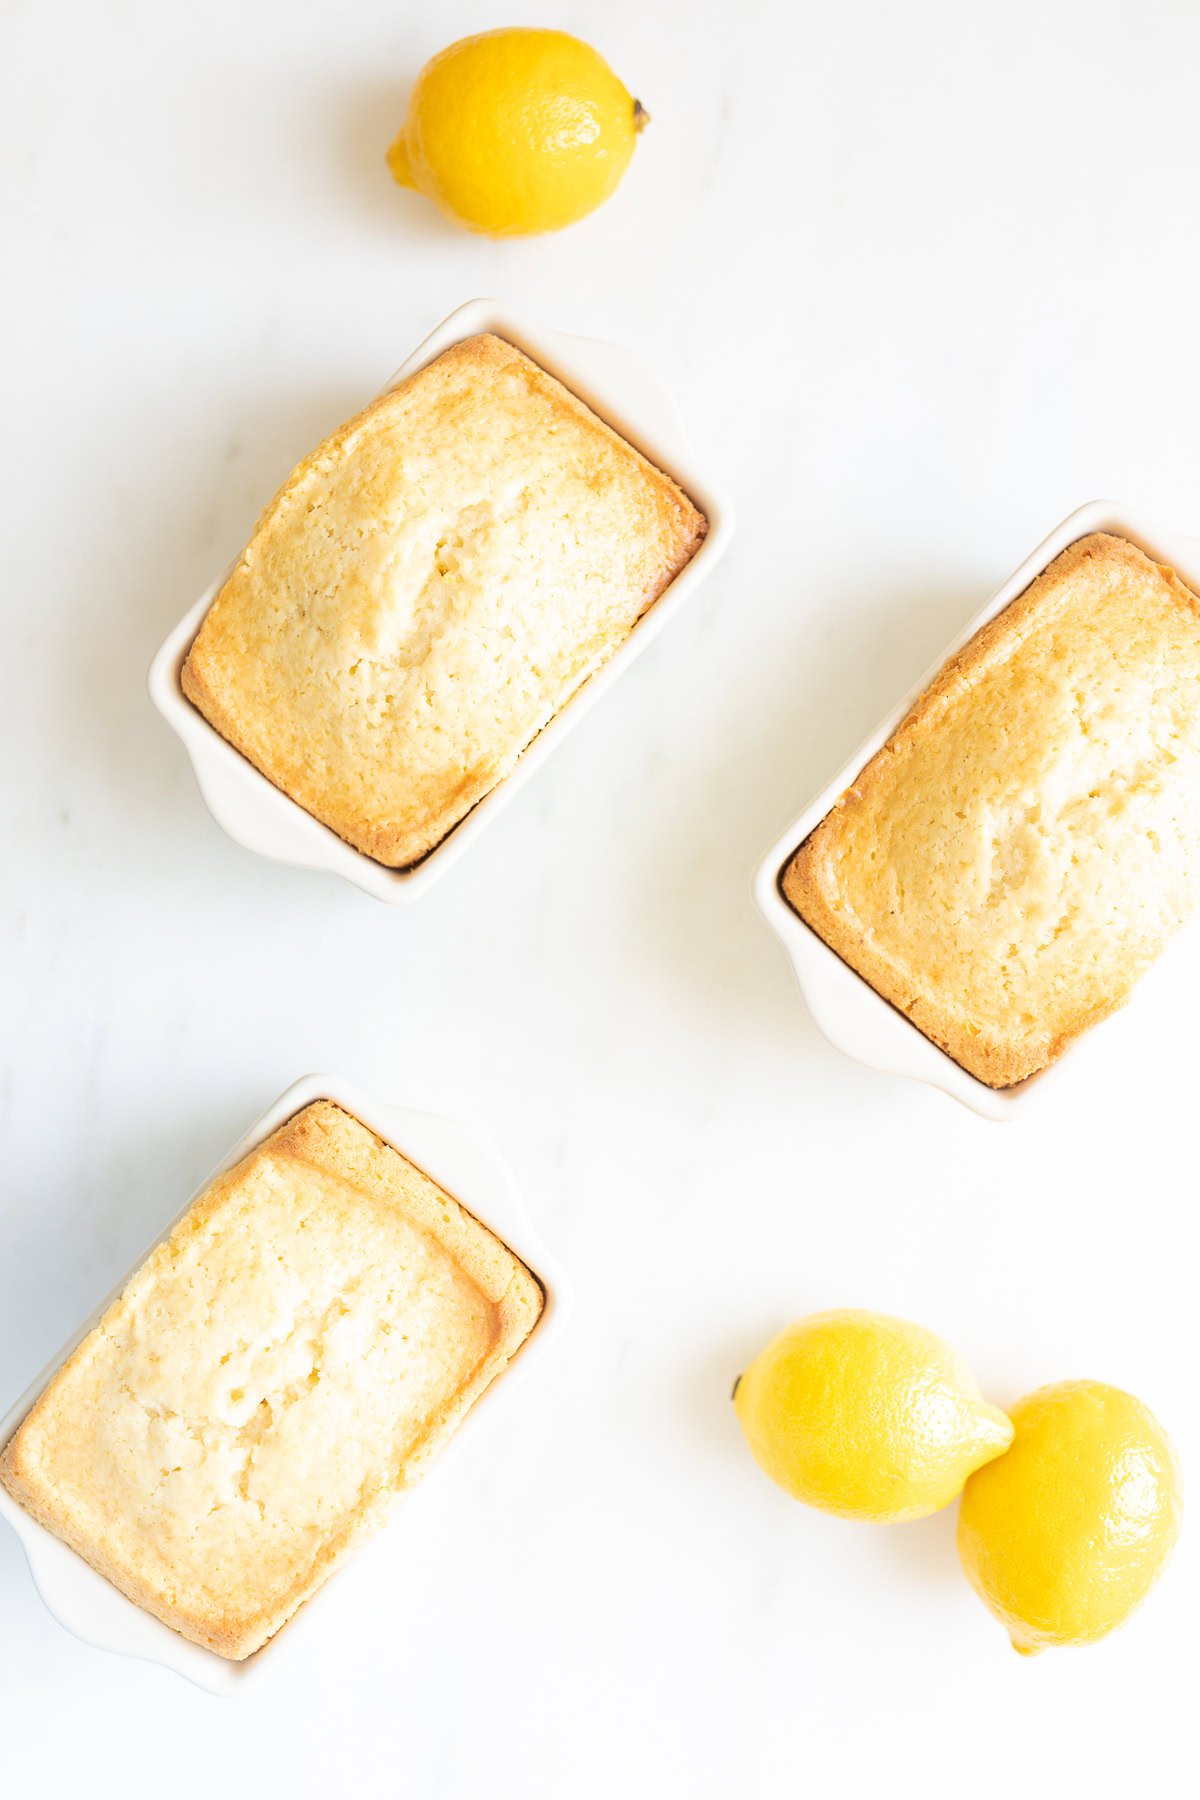 Three baked loaves of lemon bread in white rectangular dishes are arranged on a white surface. Two whole lemons are placed beside the top and bottom right loaves, making for a delightful display of lemon desserts.